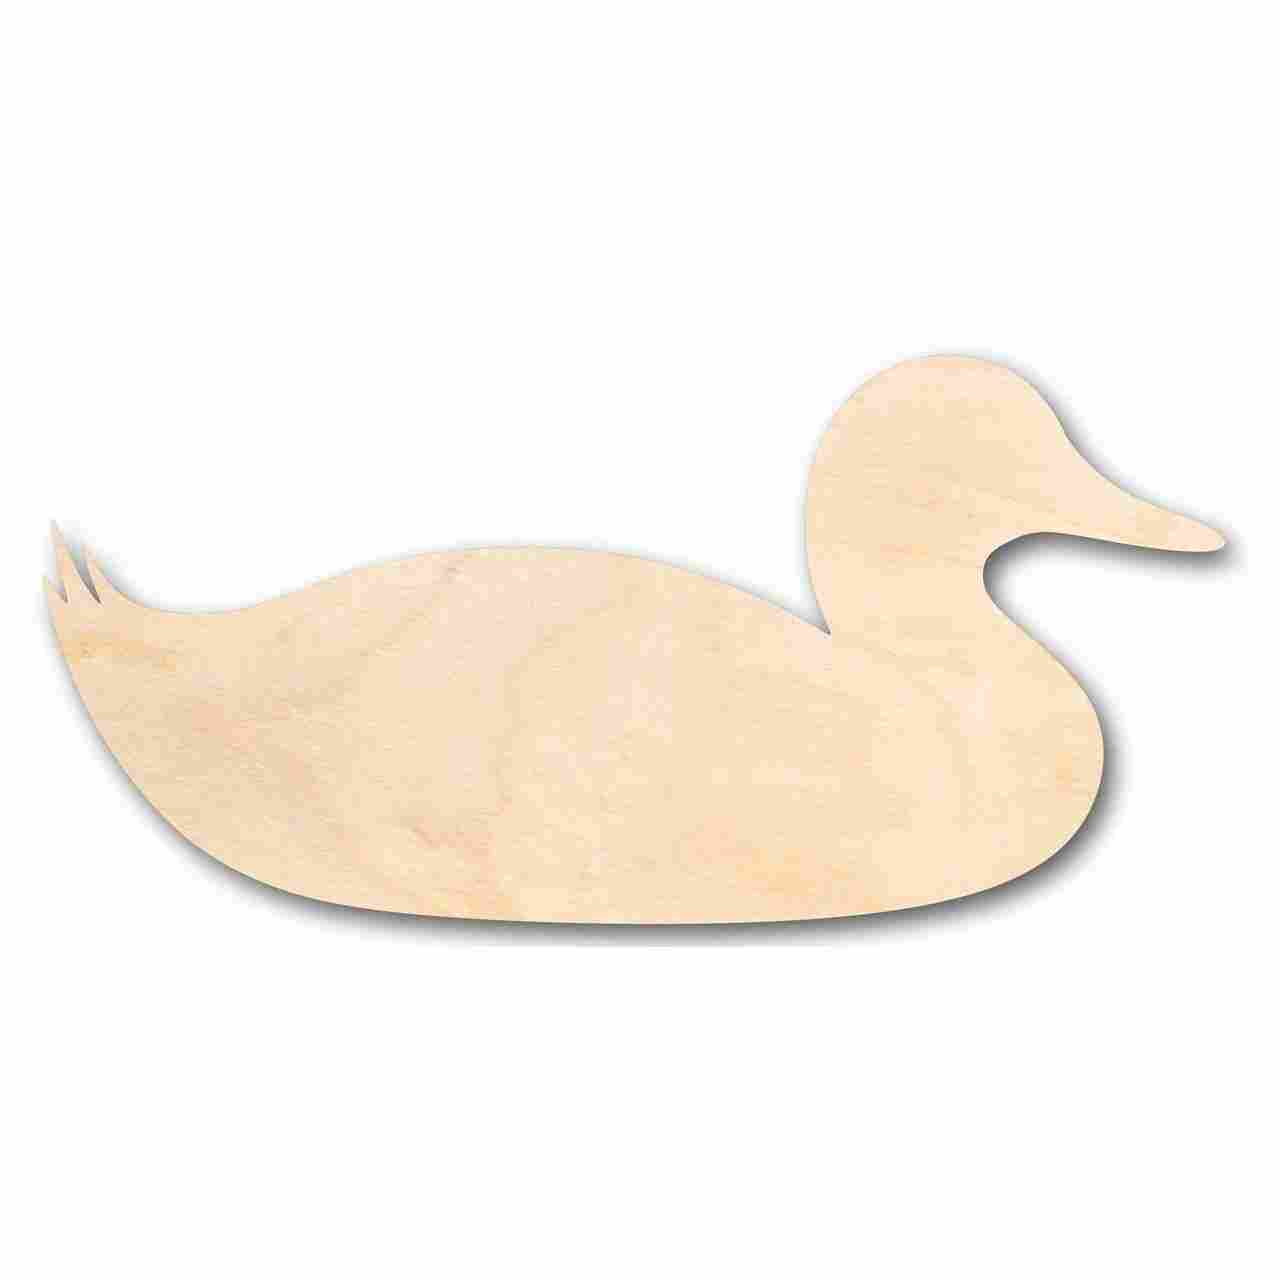 Unfinished Wooden Sitting Duck Shape - Animal - Wildlife - Craft - up to 24